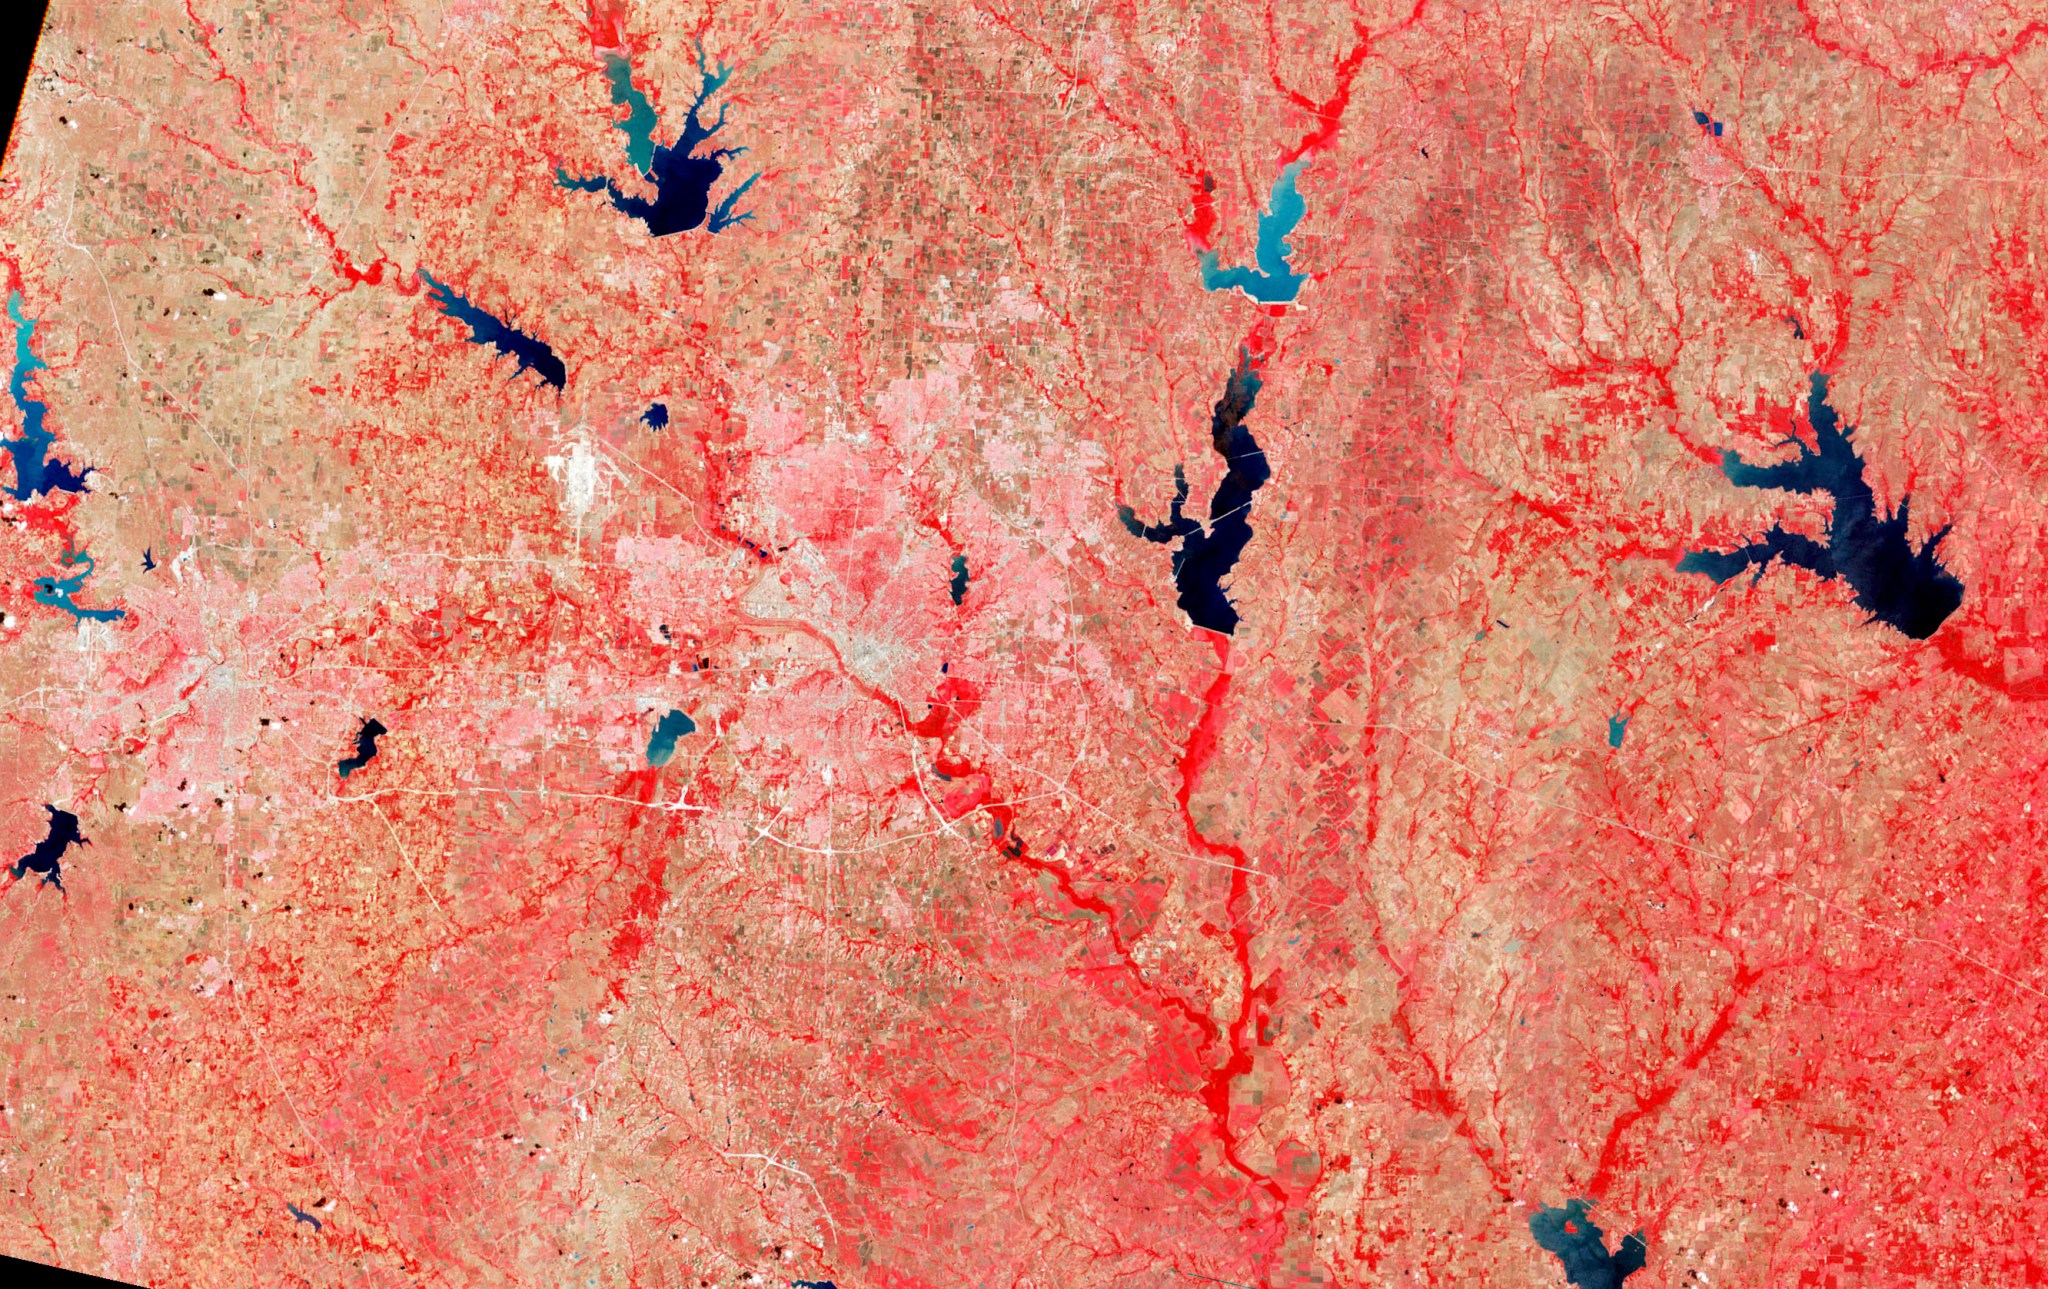 Aerial looking straight down over the Dallas area. Area looks red with some lakes throughout the image.